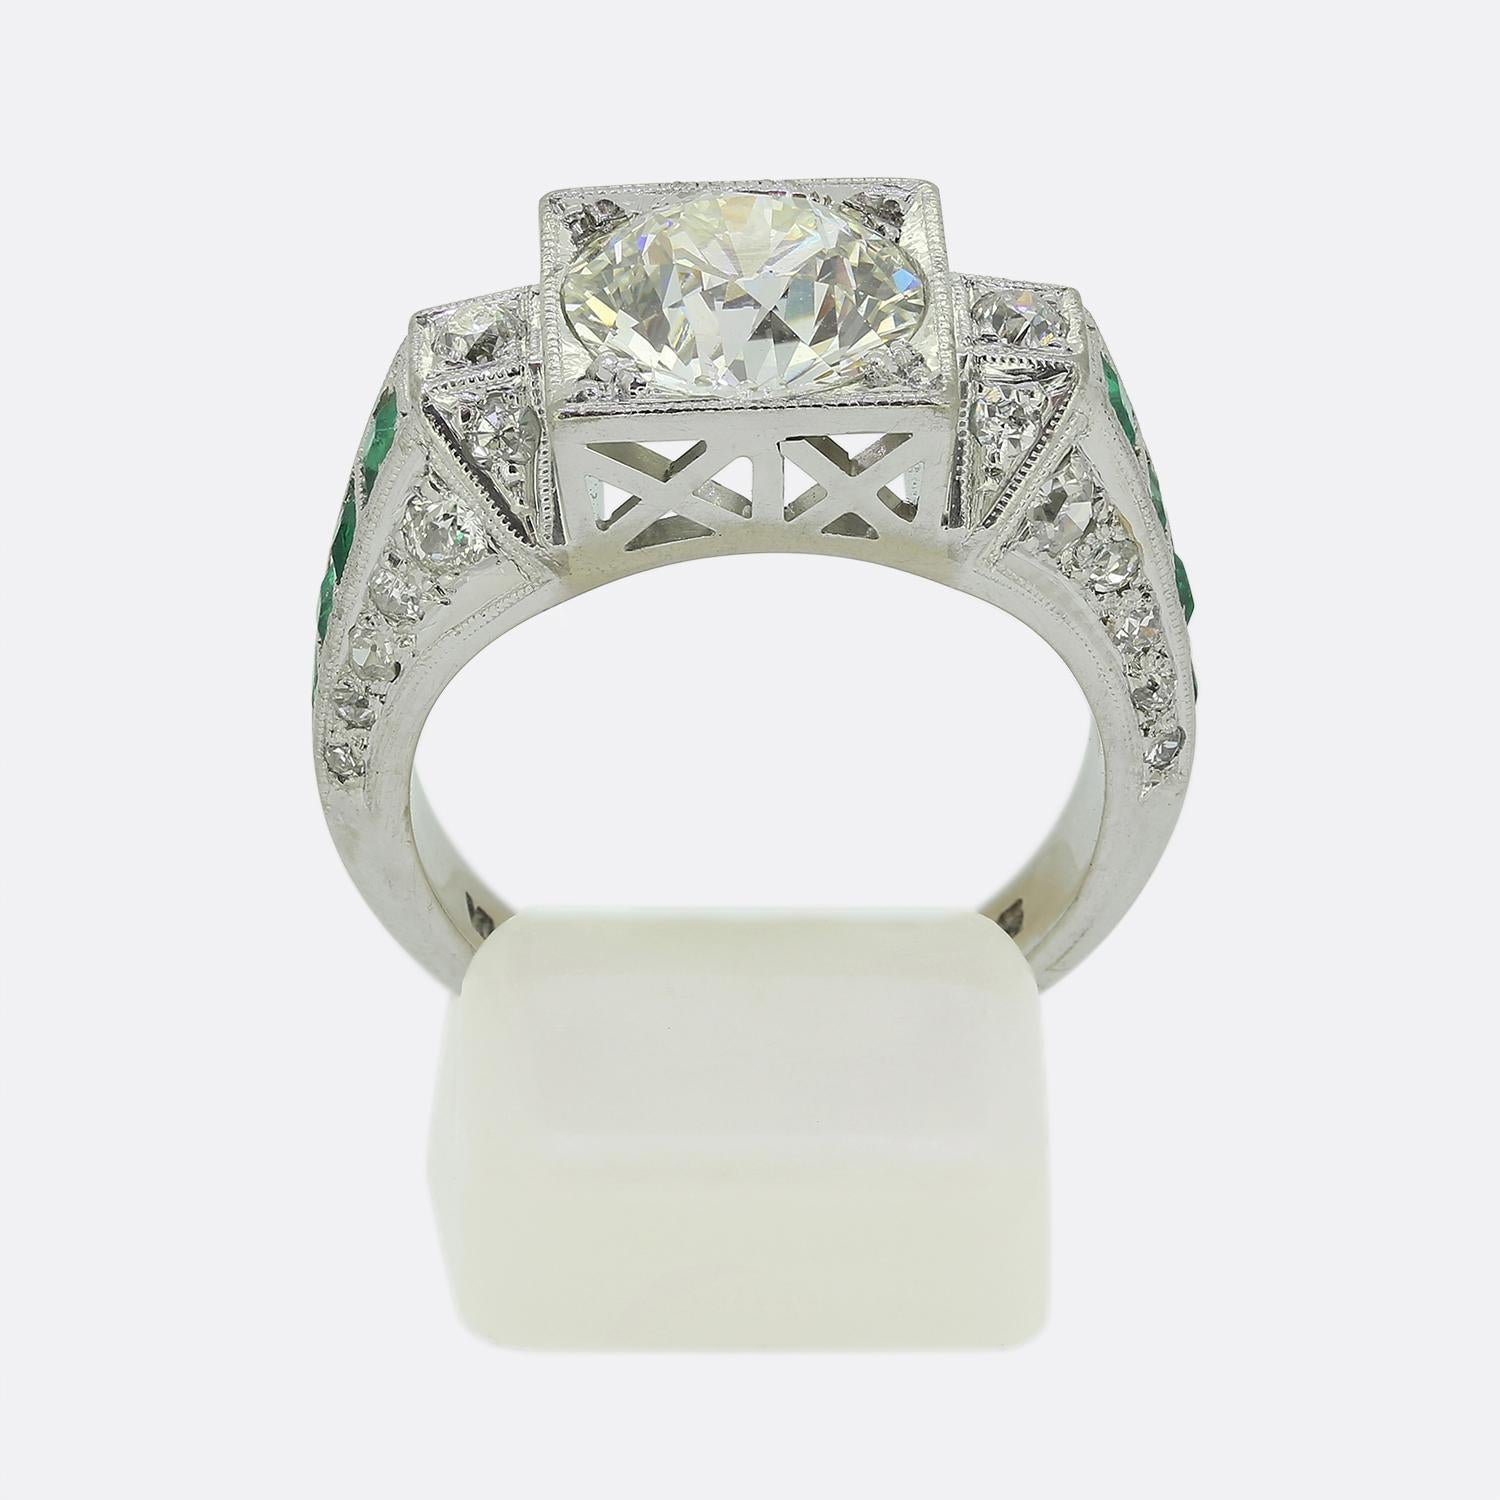 Women's or Men's Art Deco 2.65 Carat Diamond and Emerald Ring For Sale